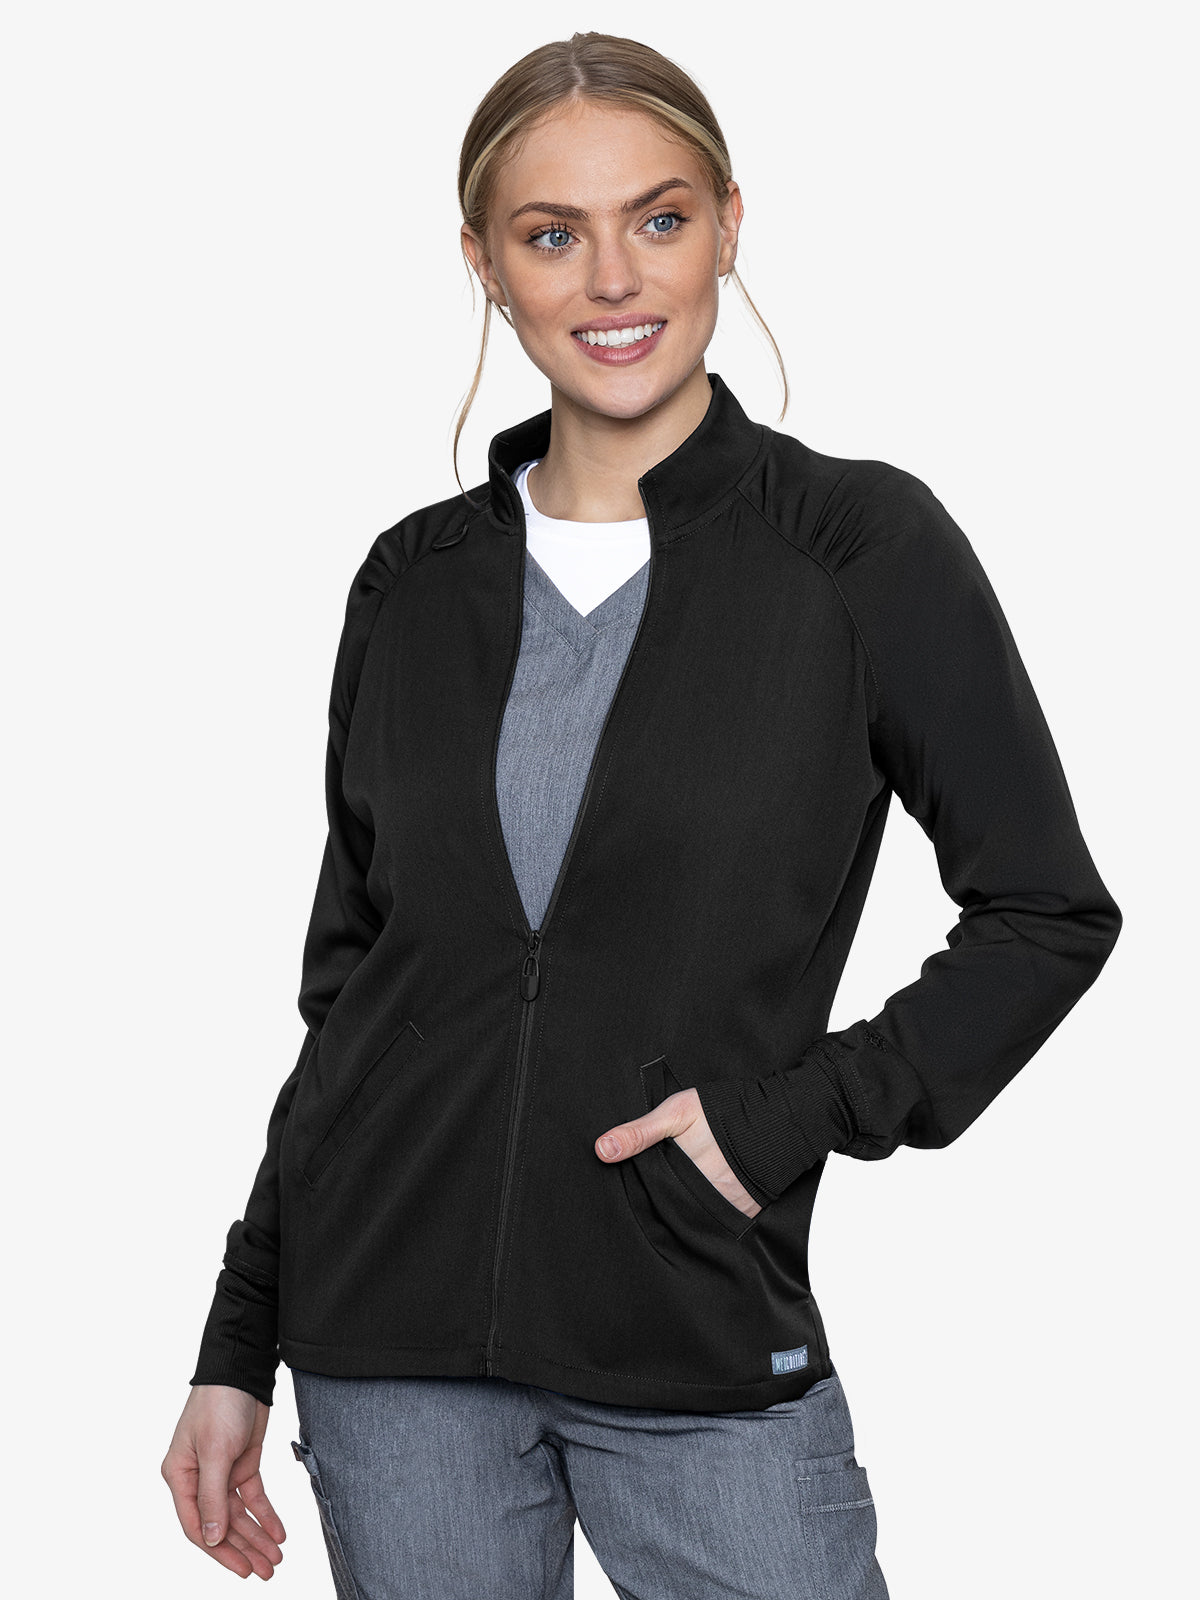 Med Couture Touch 7660 Women's Raglan Warmup Zip Jacket Black Front